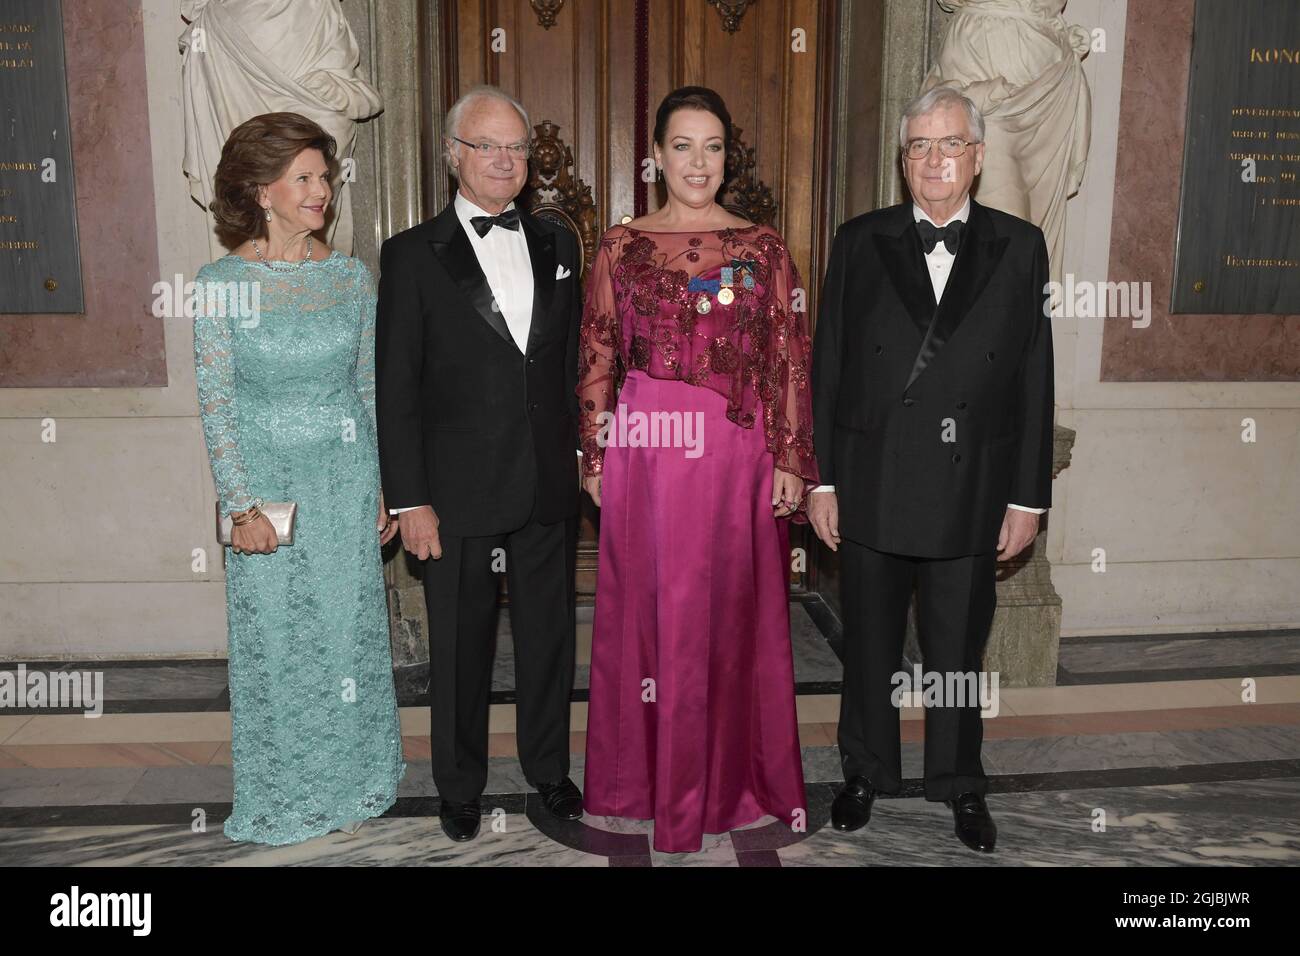 STOCKHOLM 20181011 Queen Silvia King and King Carl Gustaf with Birgit Nilsson Prize laureate opera singer Nina Stemme and Rutbert Reisch chairman of Birgit Nilsson foundation at the Royal Opera on Thursday Oct. 11, 2018. Photo Anders Wiklund / TT kod 10040  Stock Photo